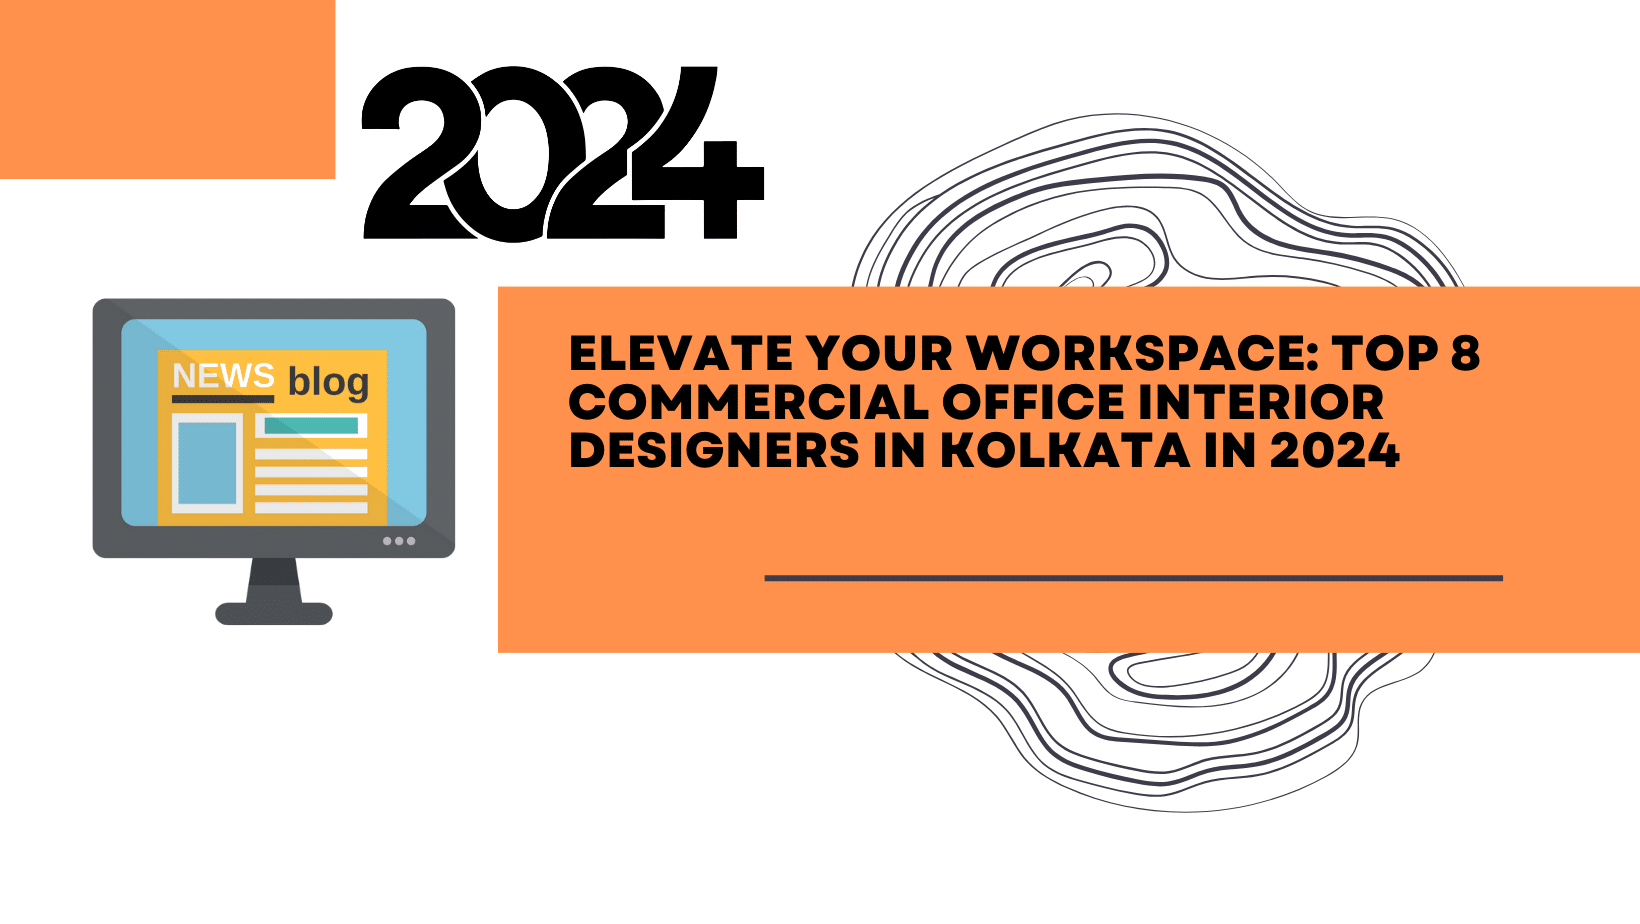 Elevate Your Workspace: Top 8 Commercial Office Interior Designers in Kolkata in 2024